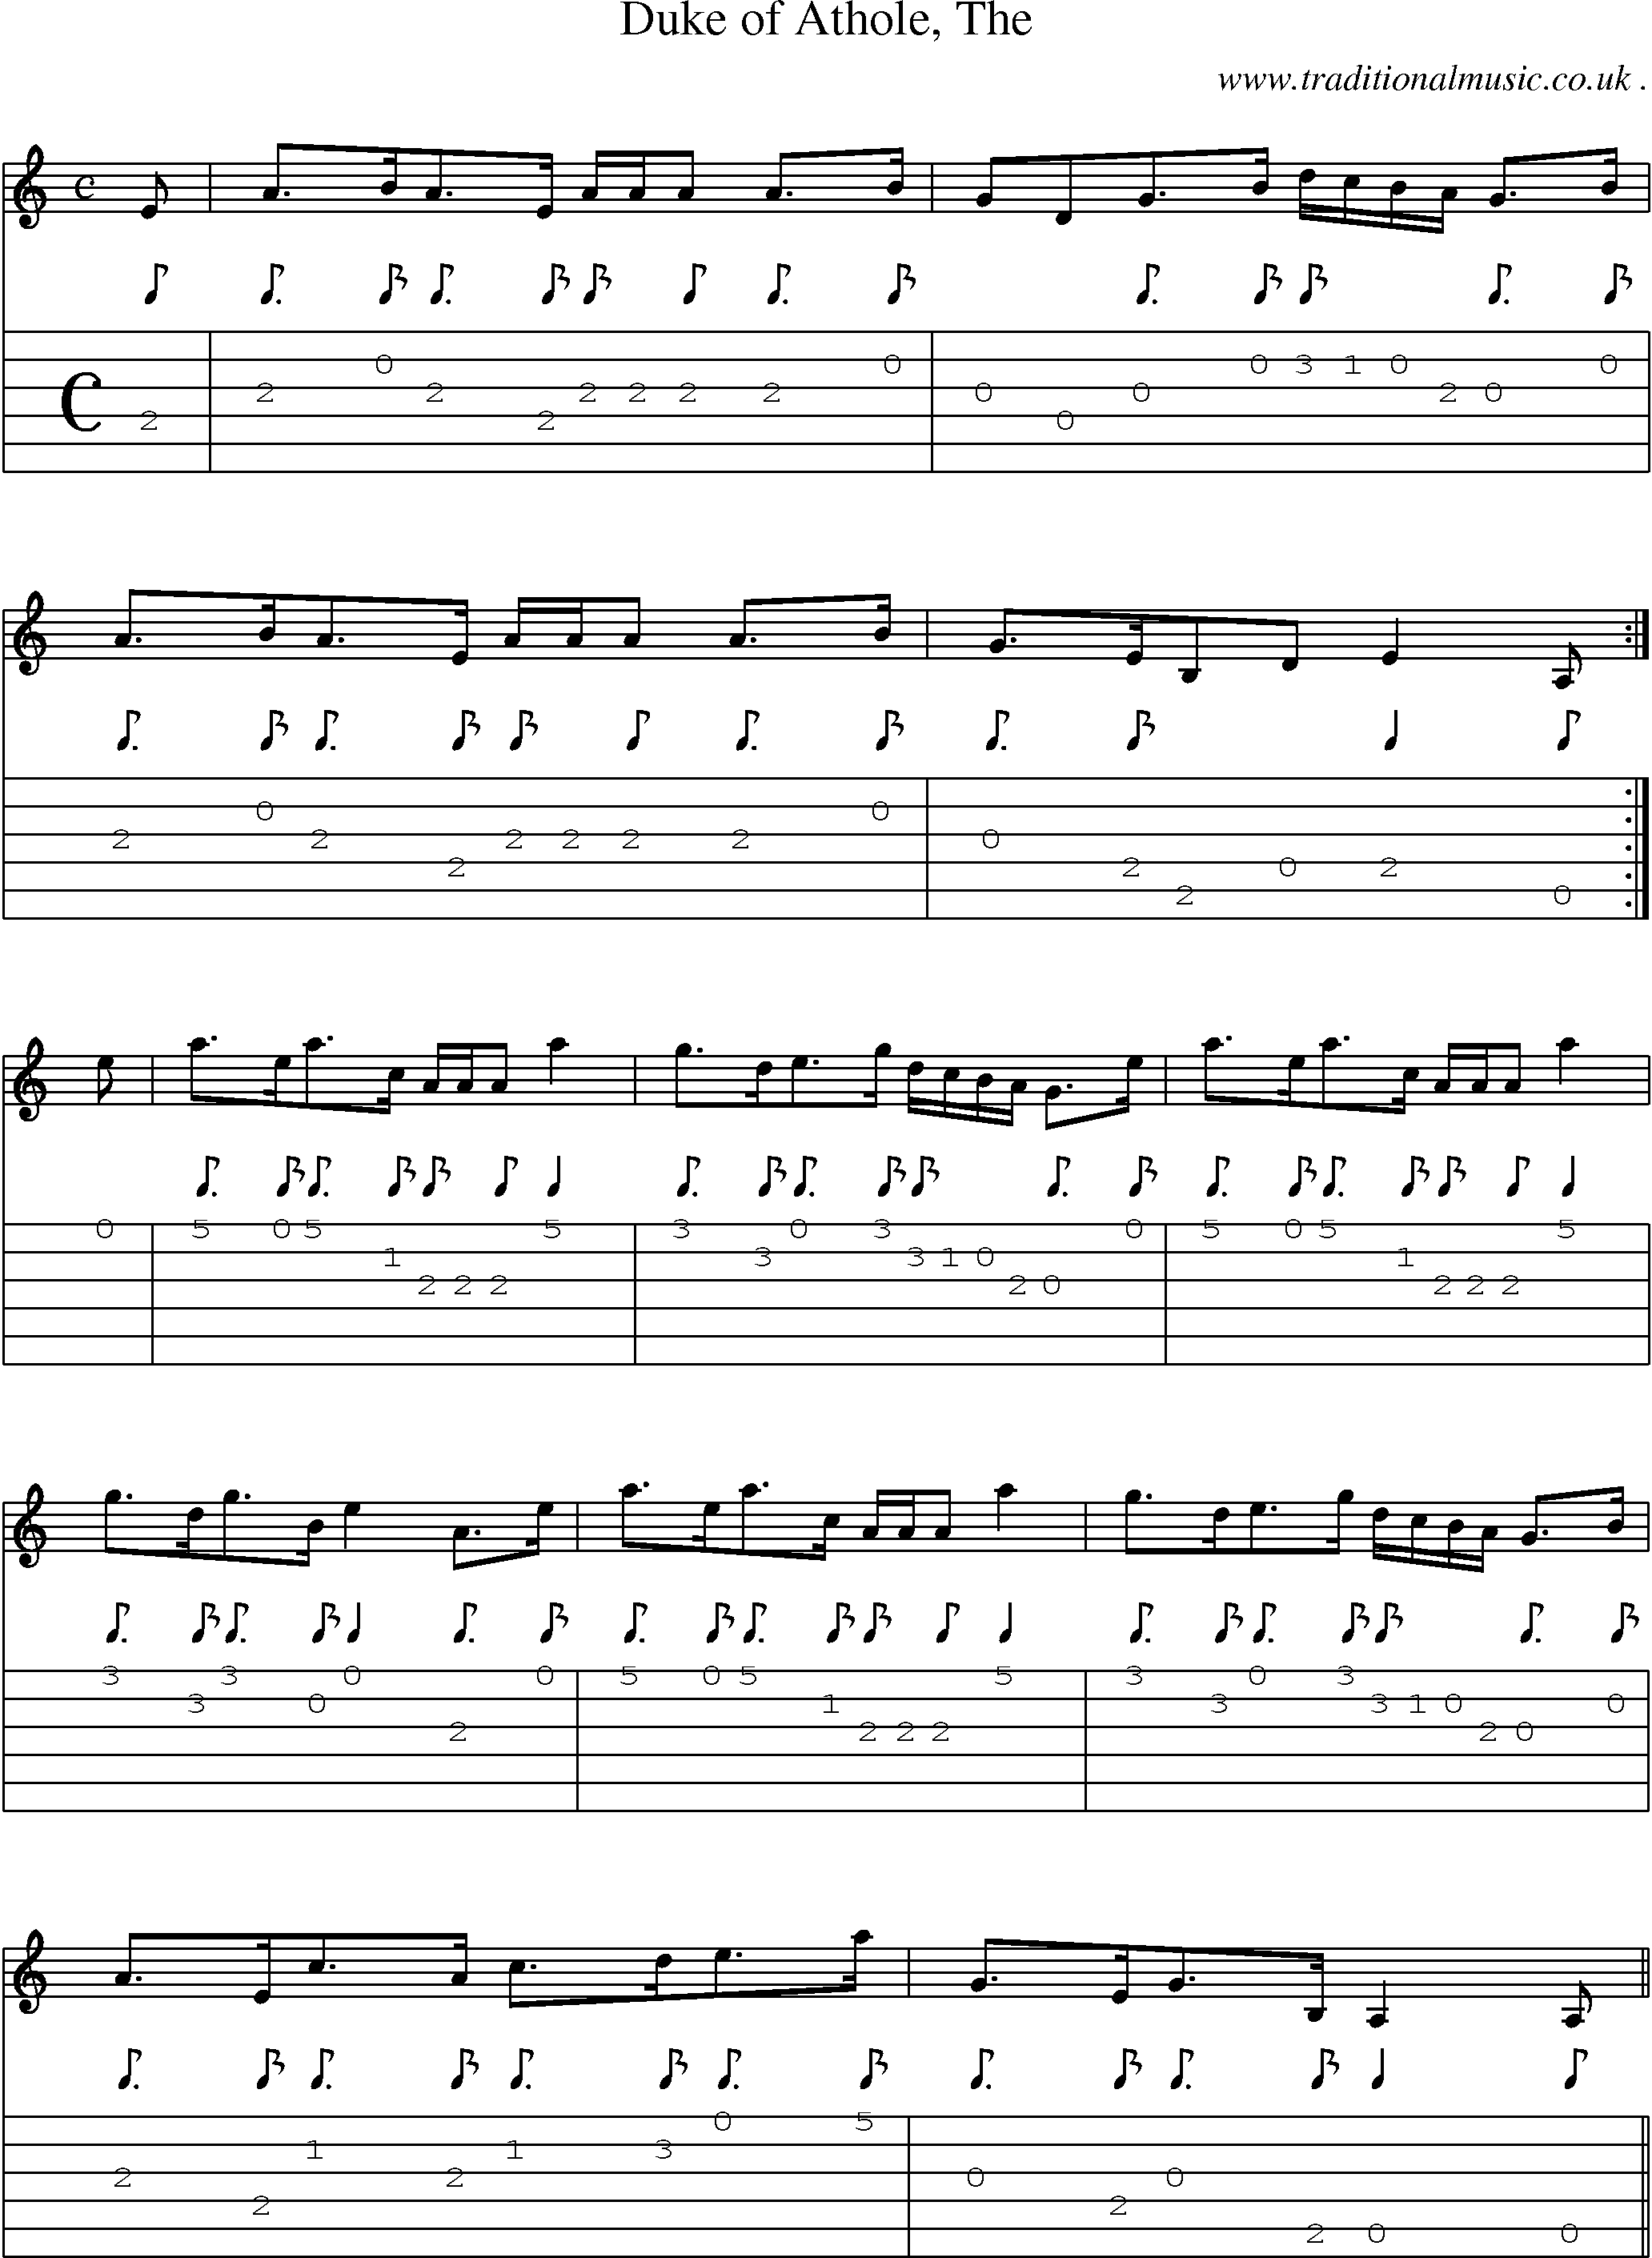 Sheet-music  score, Chords and Guitar Tabs for Duke Of Athole The